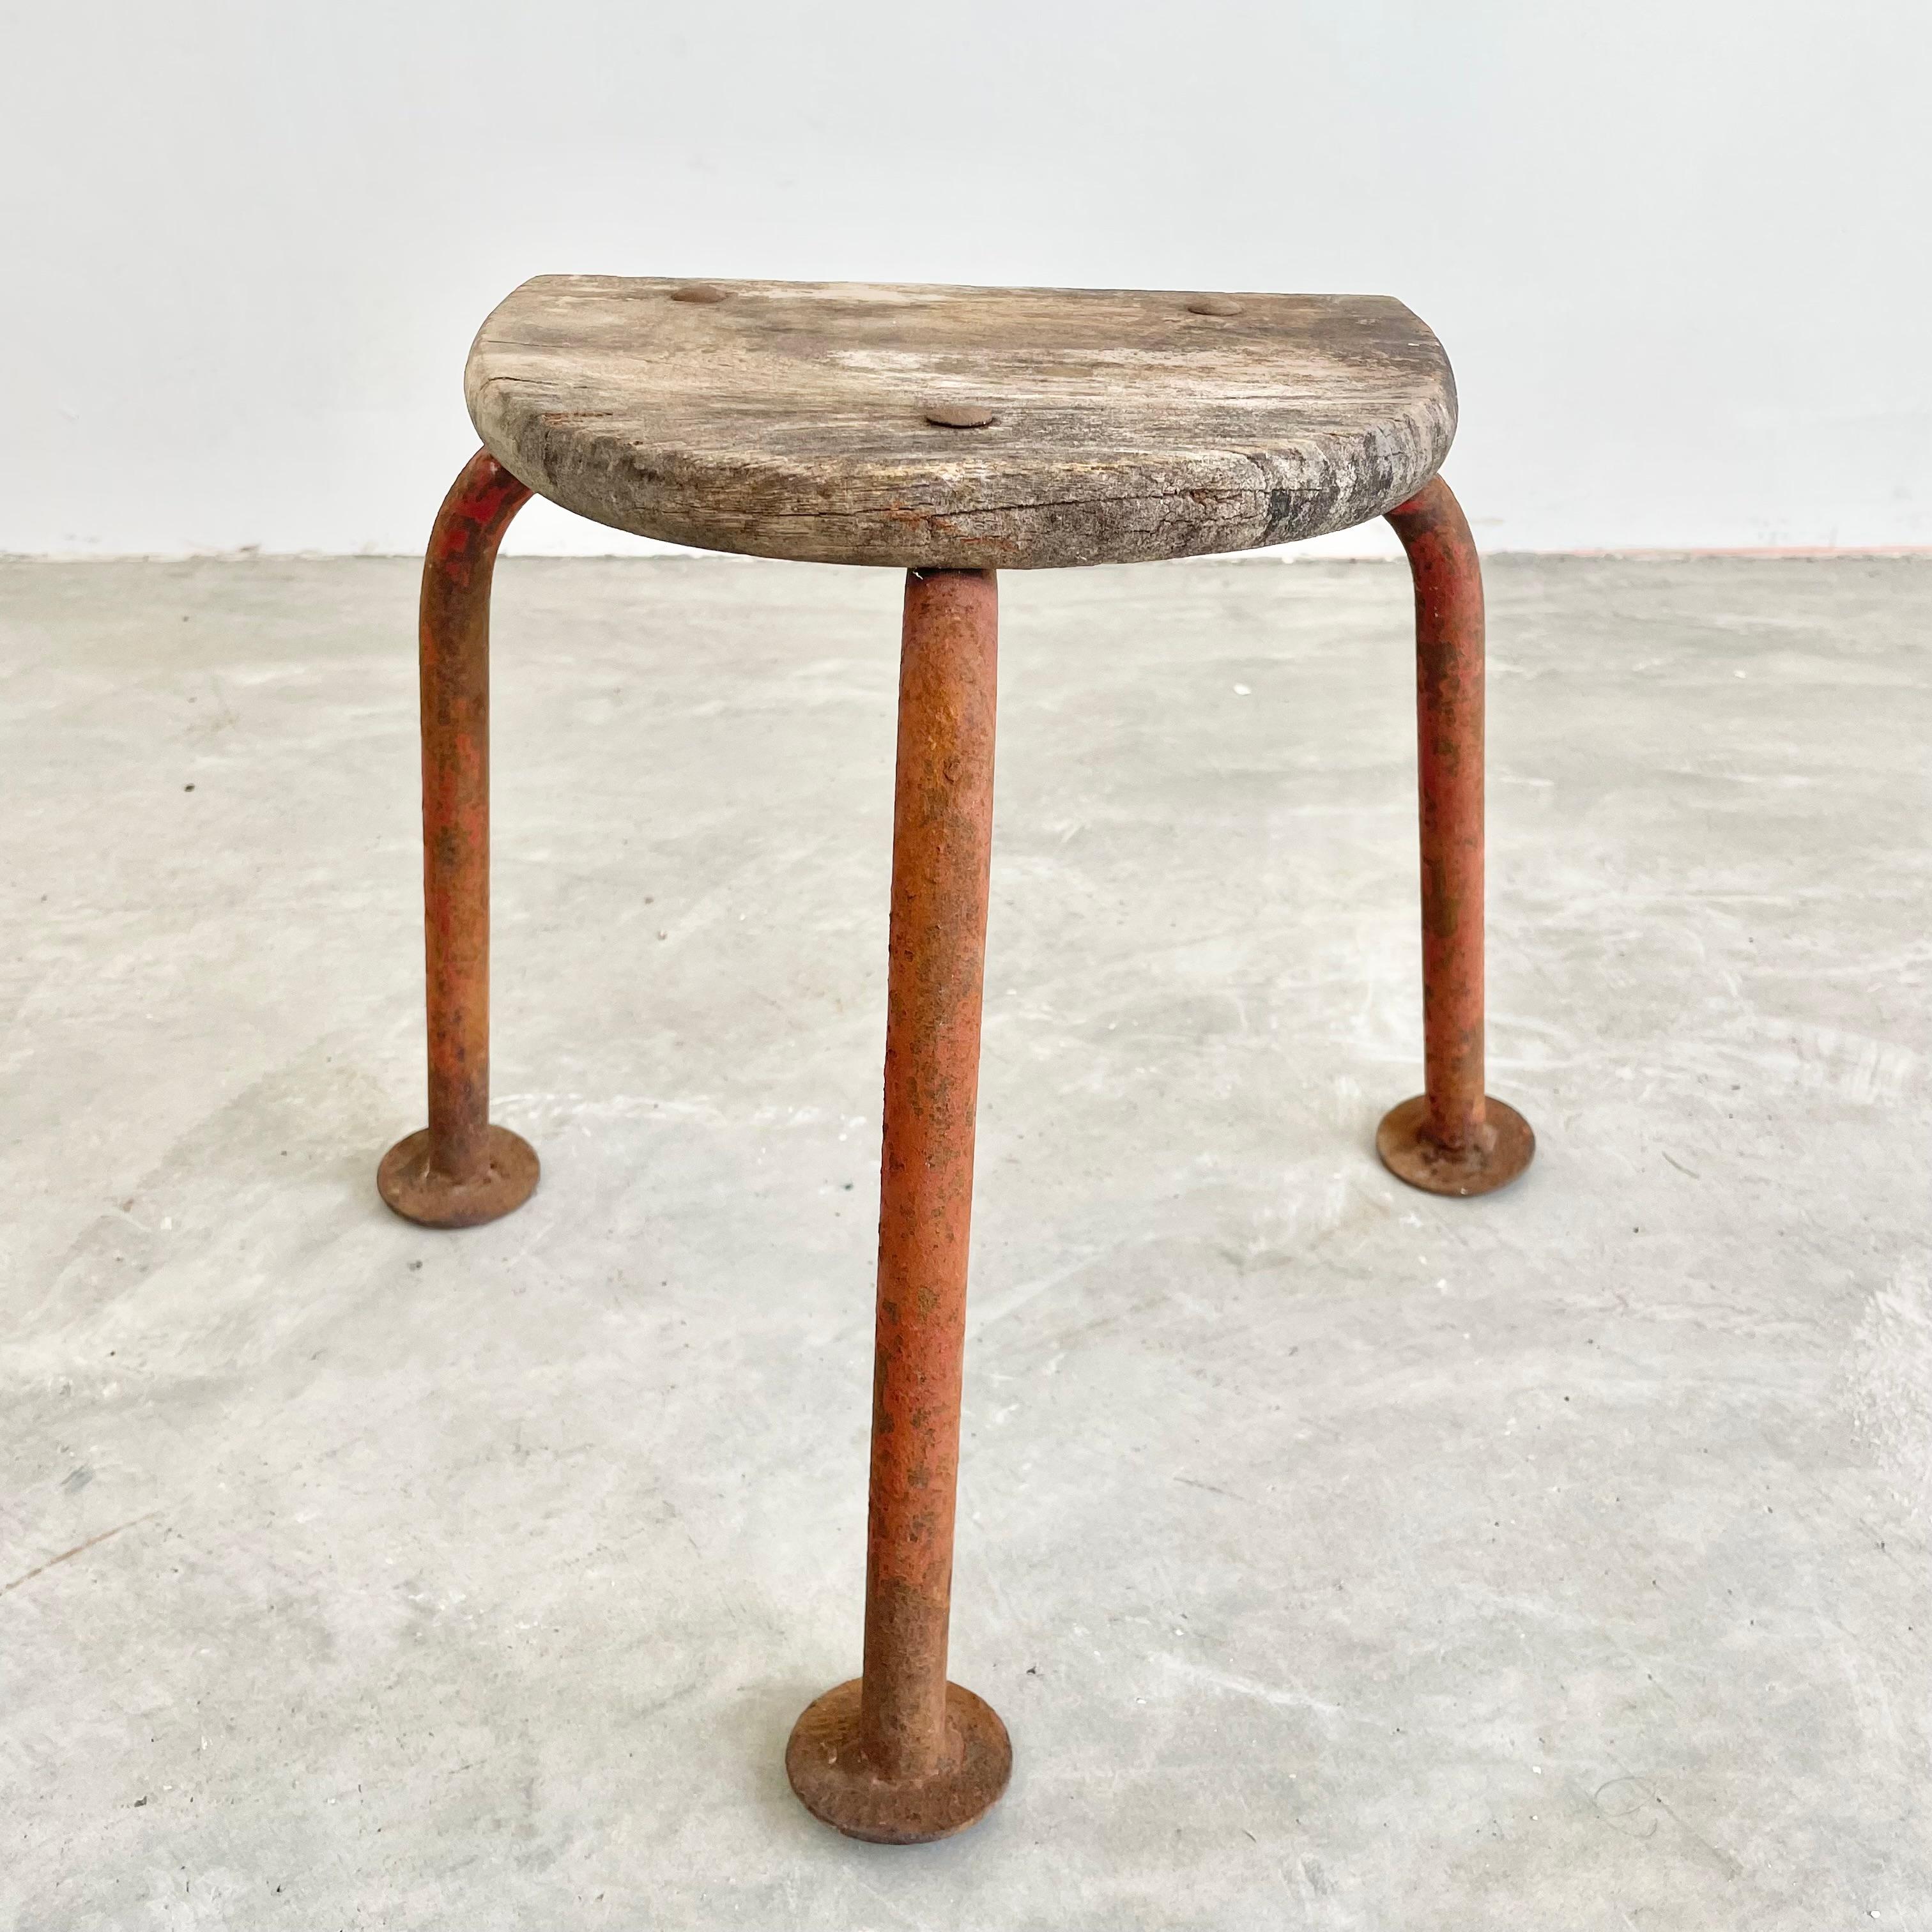 Tripod wooden stool, made in France, circa 1950s. Thick wood seat with three rounded metal legs. Great lines and shape. Petite stool with a lot of presence. Great vintage condition. Perfect for books or objects. Sturdy for sitting.
 